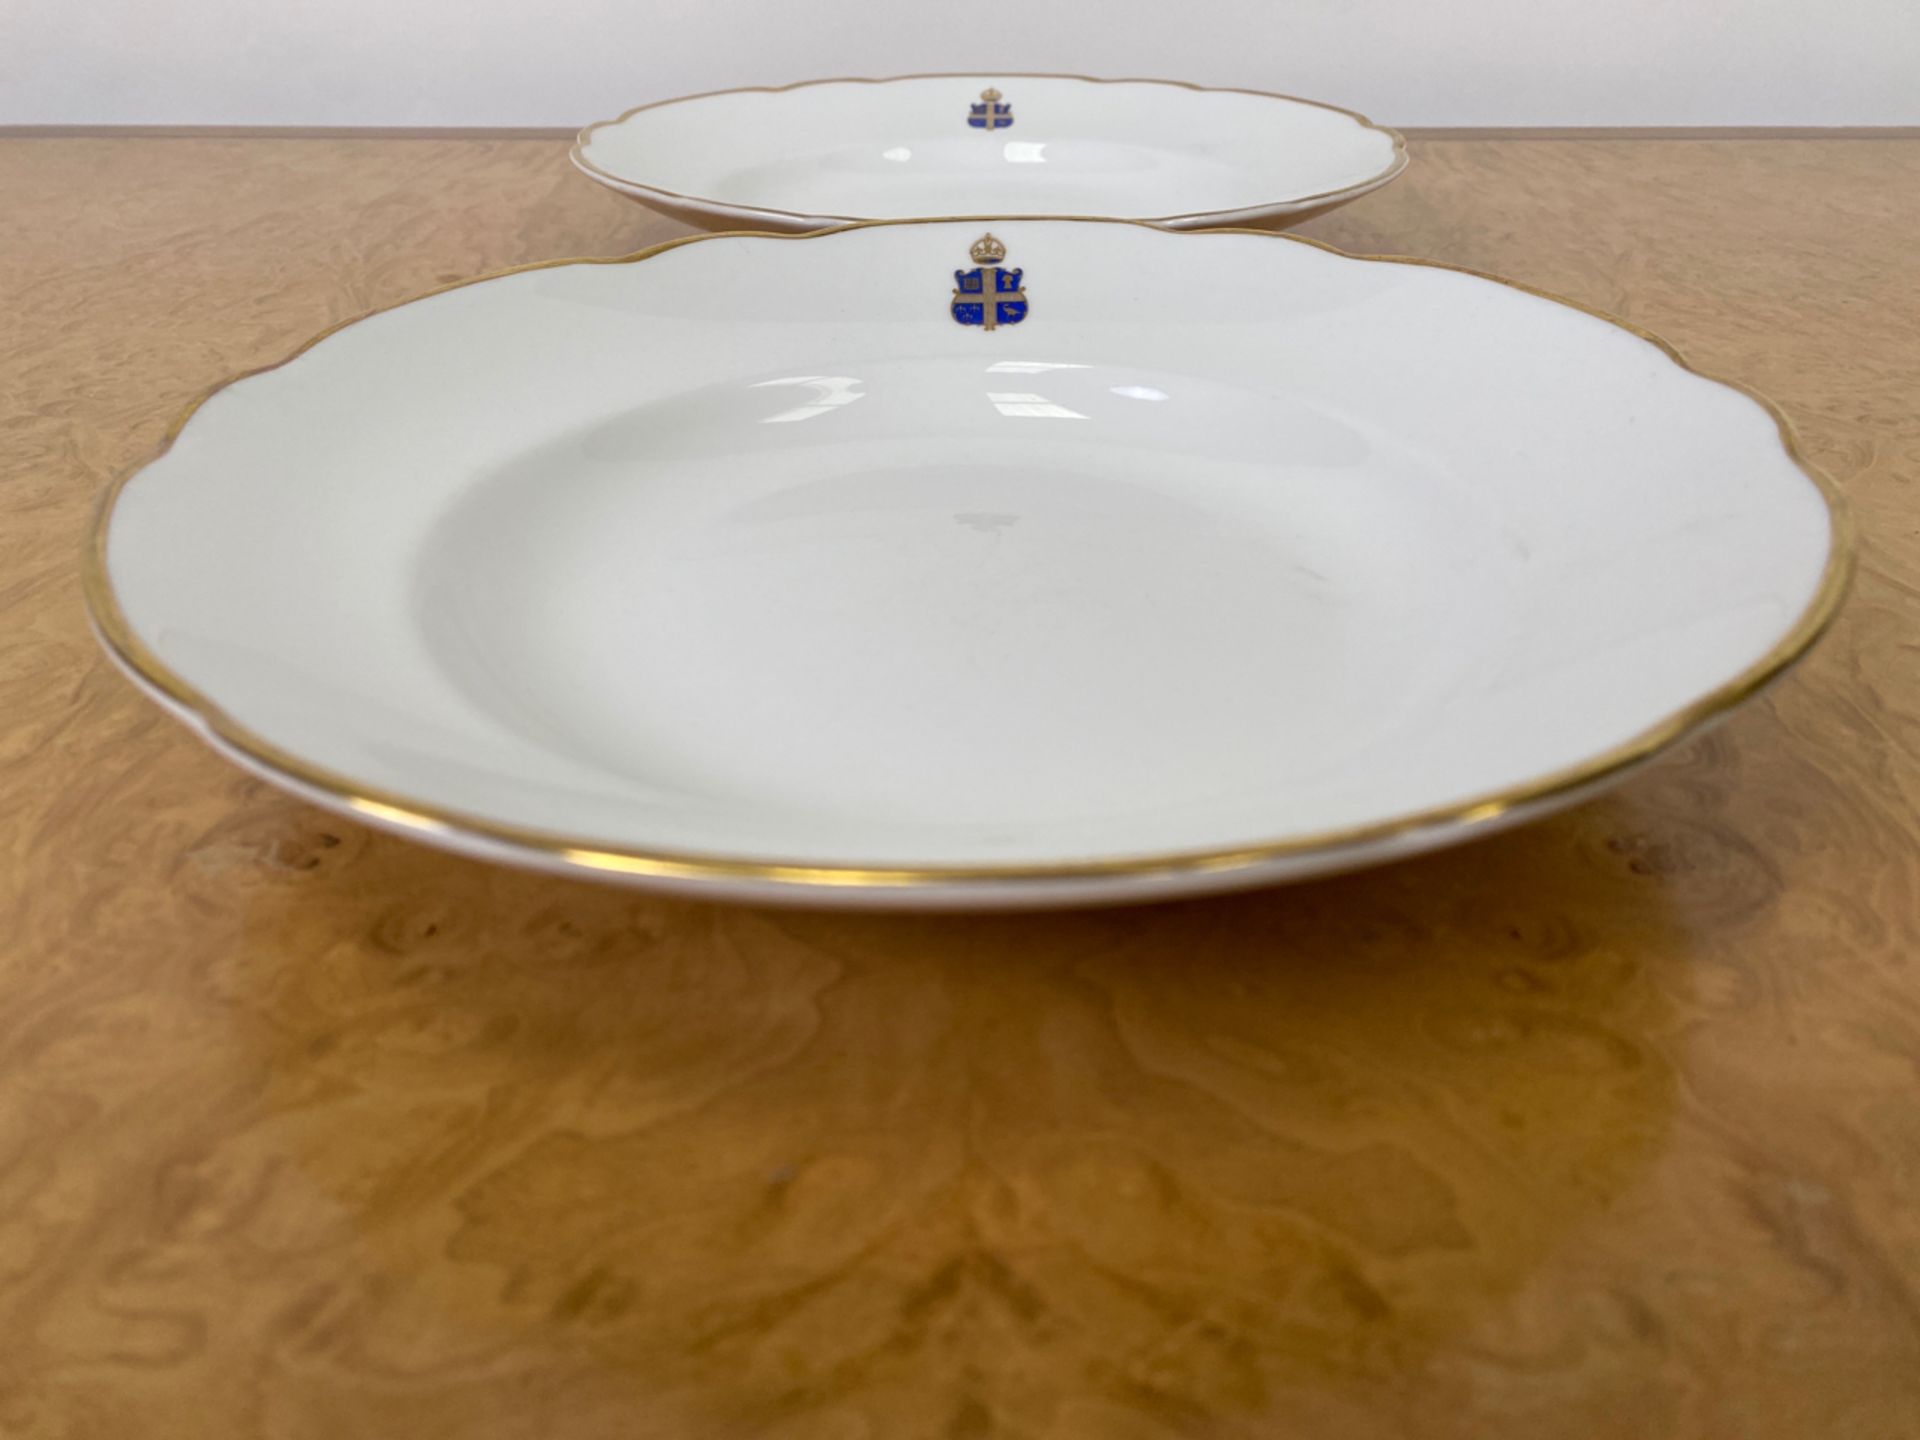 Set of Crested Crockery for Claridge's by Chommette 1884 - Image 40 of 44